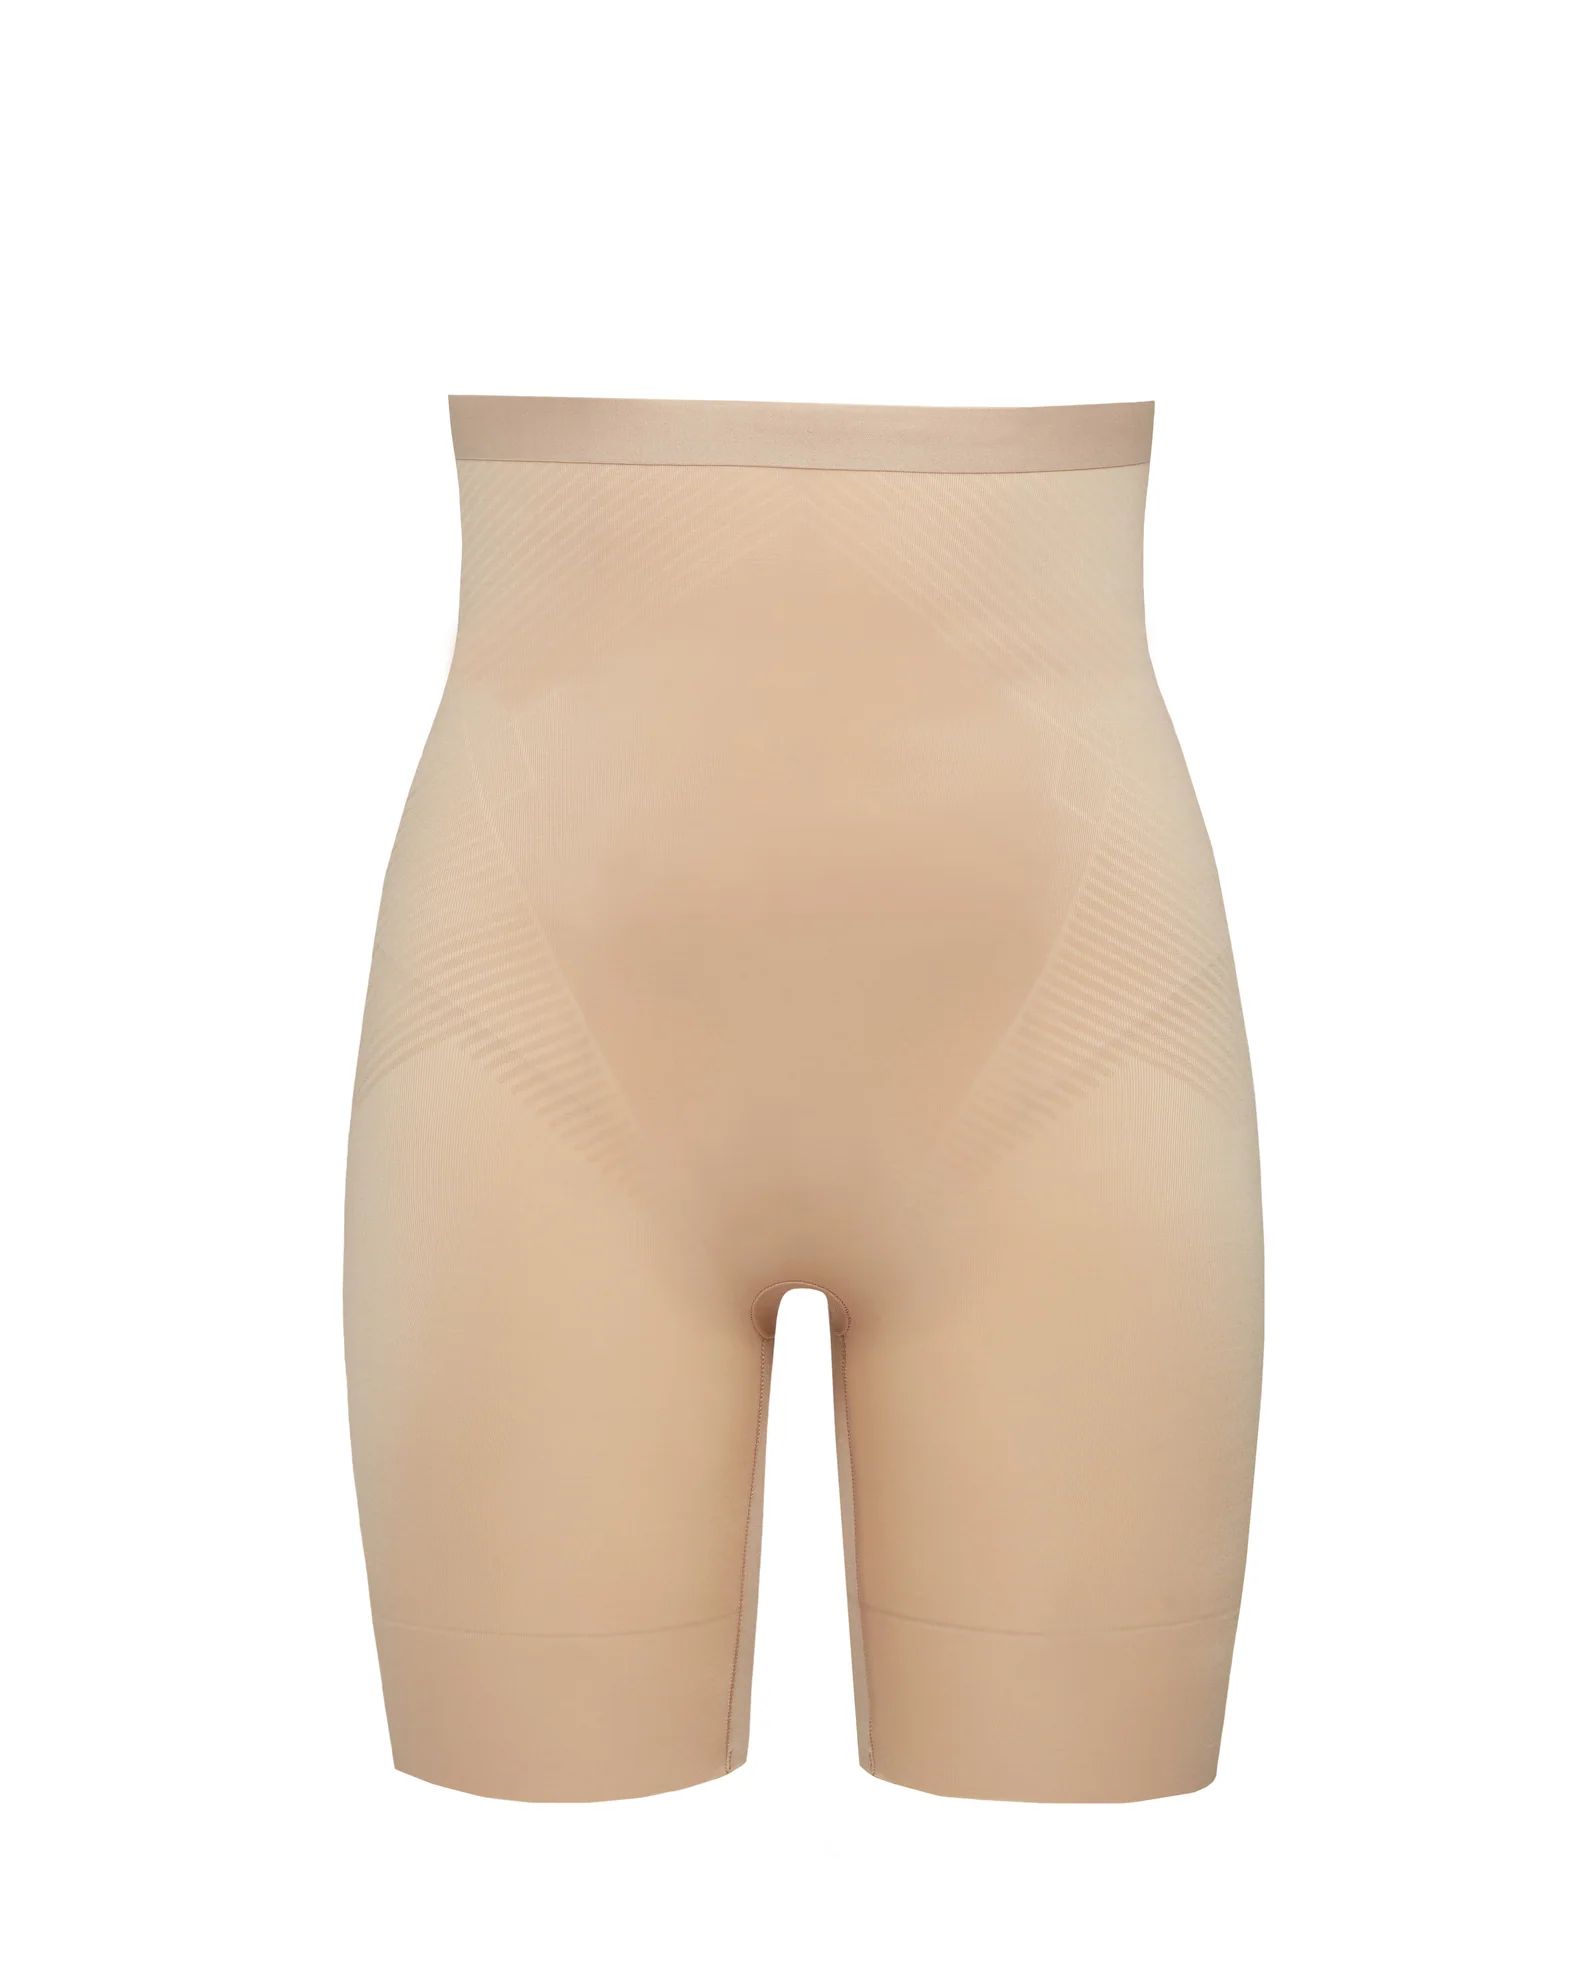 Thinstincts® 2.0 High-Waisted Mid-Thigh Short | Spanx Canada